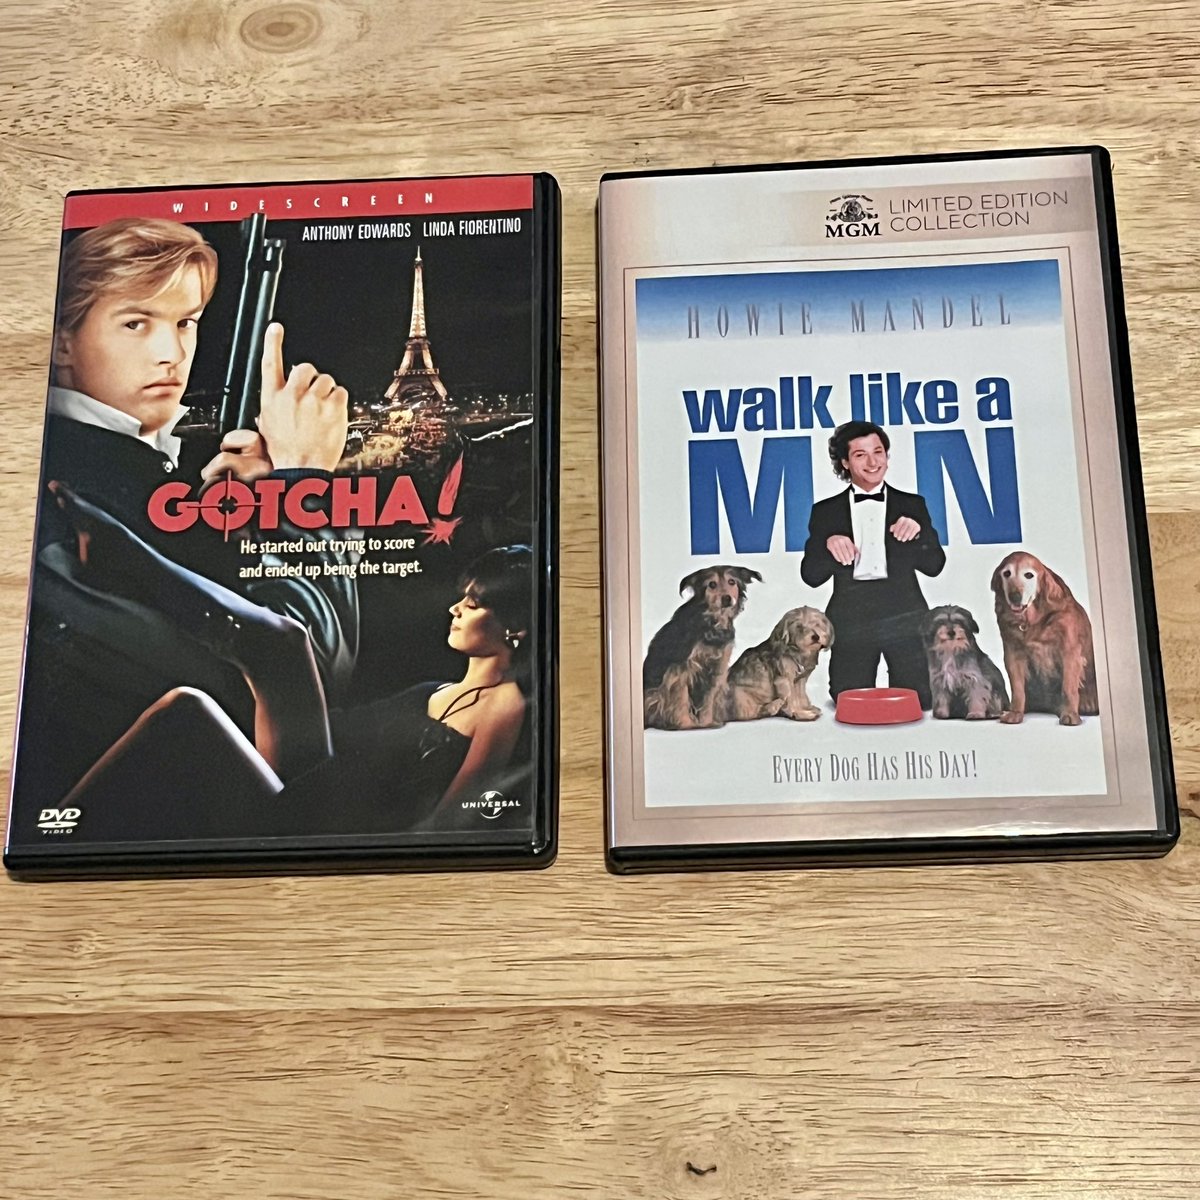 Trying to decide which one to watch tonight. Maybe both? #80sMovies #Gotcha #WalkLikeAMan #AnthonyEdwards #HowieMandel #80sComedy #80sAction #DVDCollector #DVDCollection #80sCollection